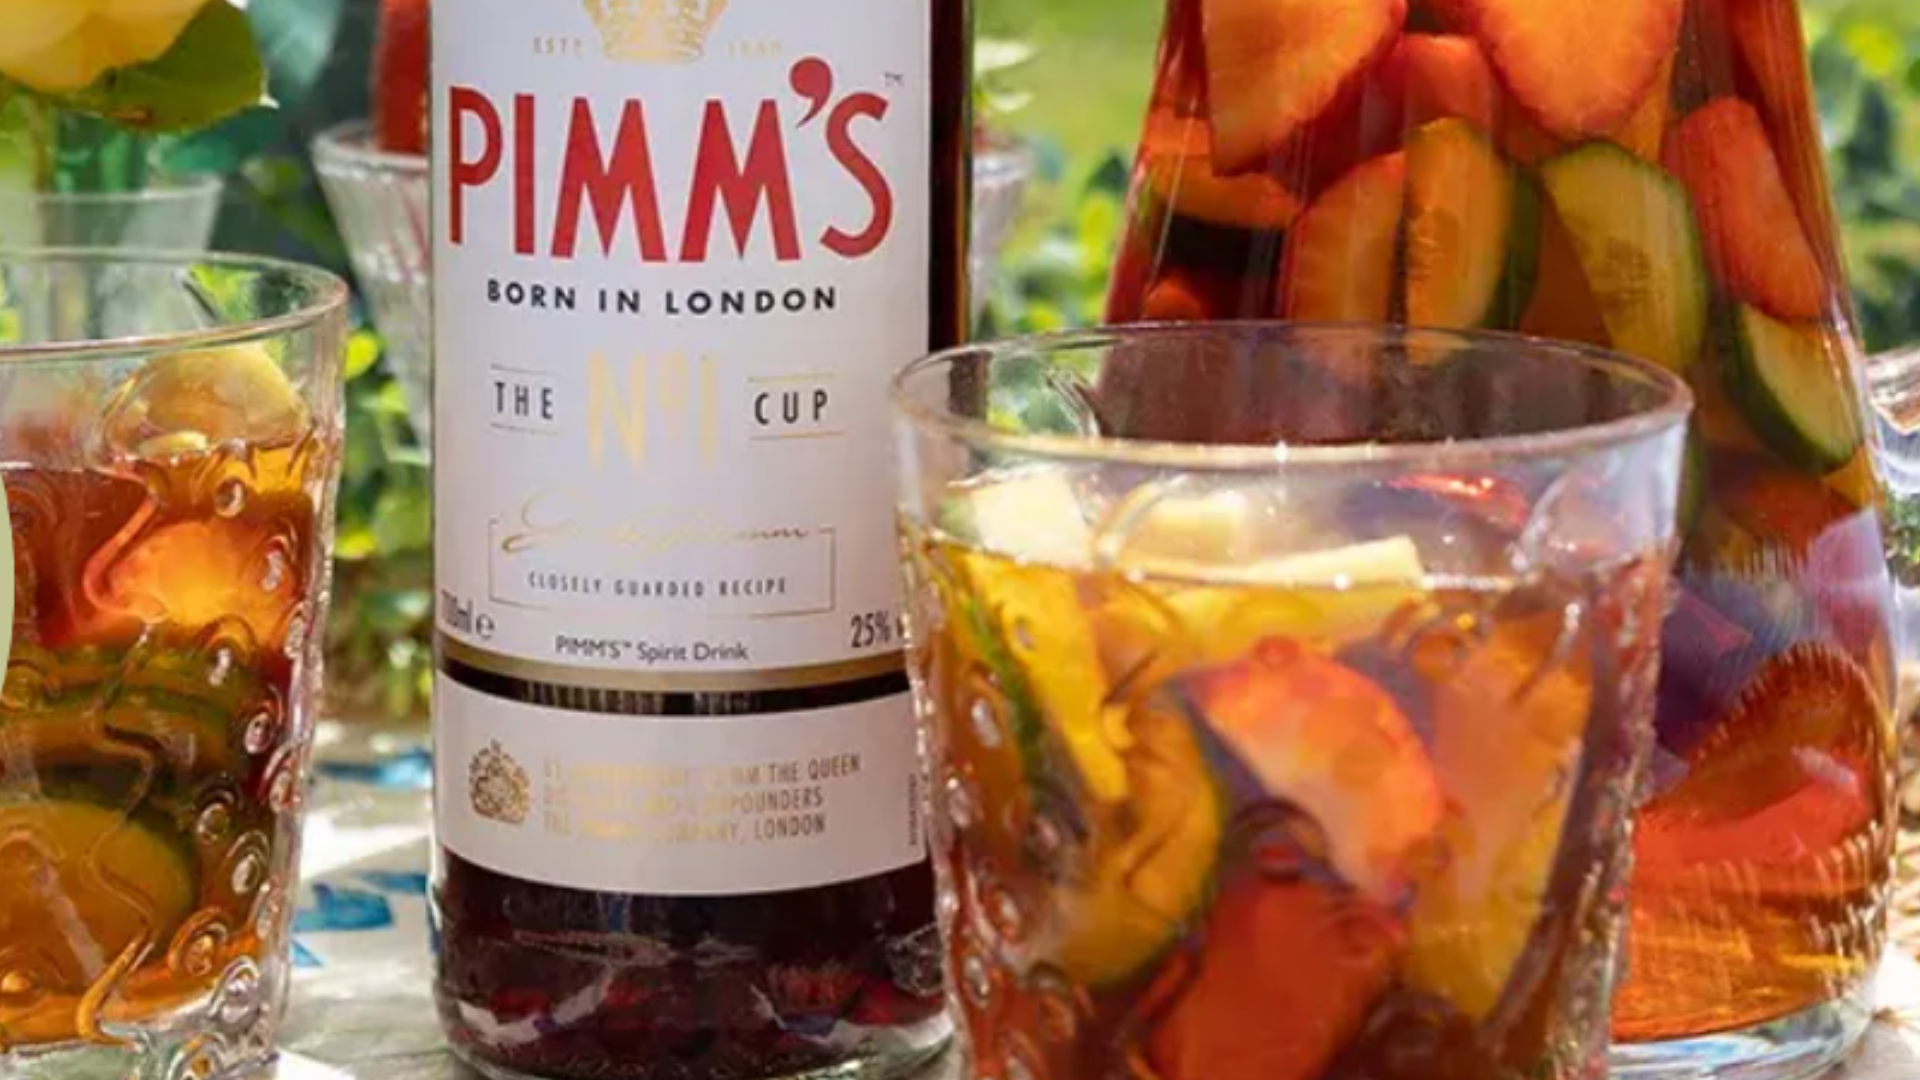 Bottle of Pimms, Pimms in a jug and glasses of Pimms